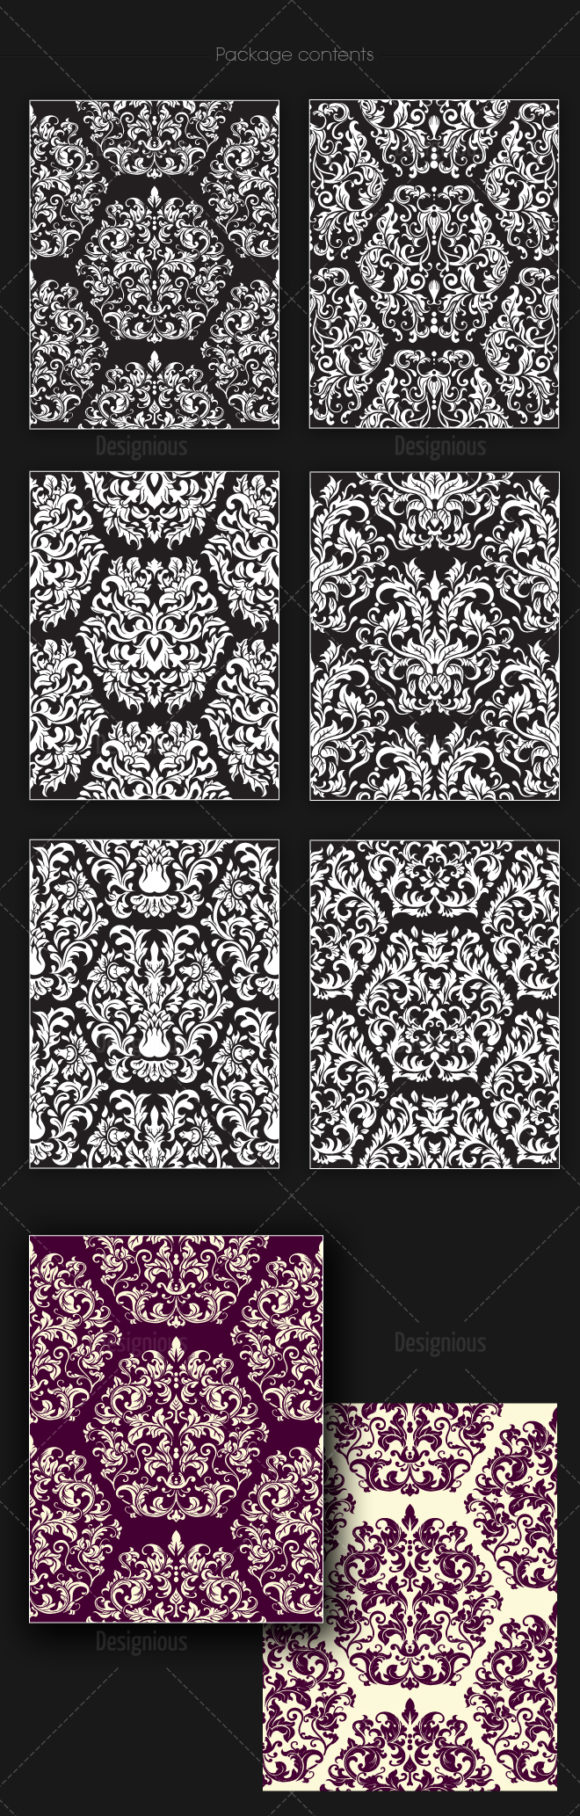 Seamless Patterns Vector Pack 148 2